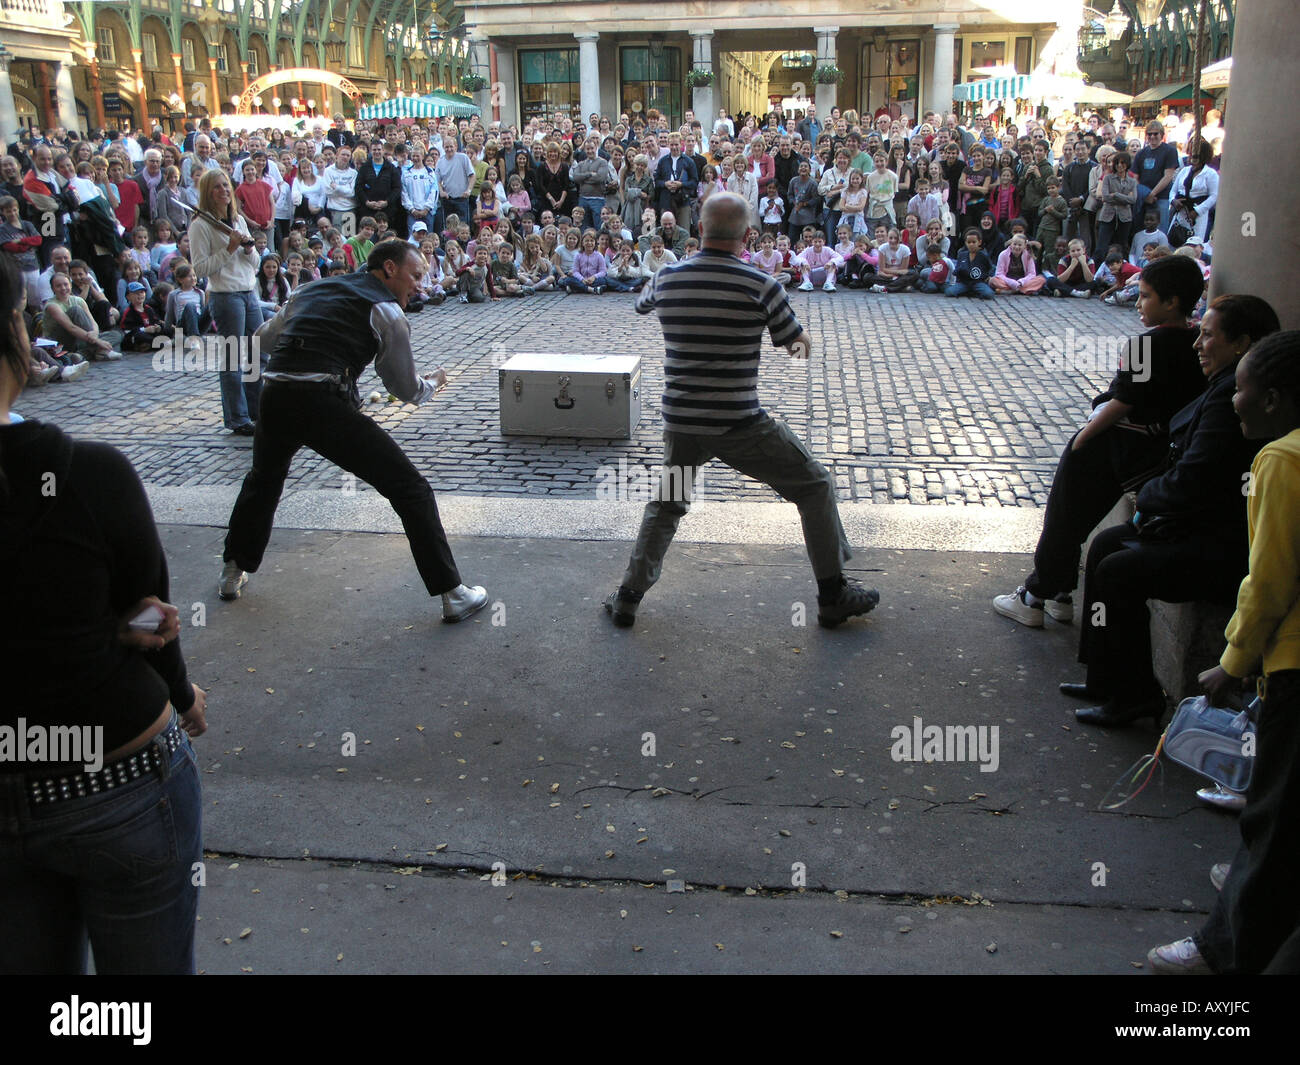 Street theatre attracts large crowds in the piazza at Covent Garden London EU Stock Photo